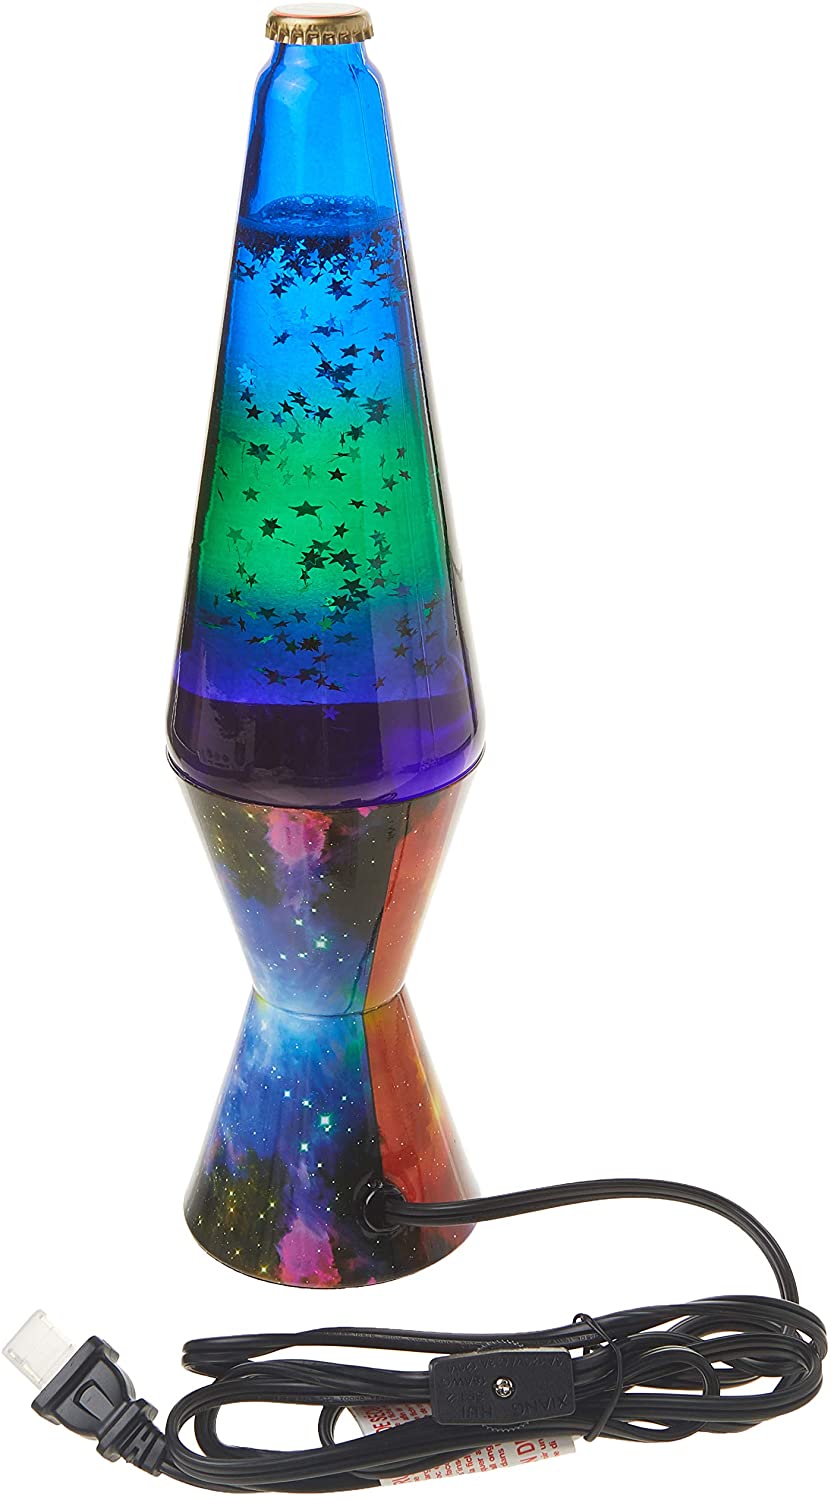 Silver glitter lava lamp. 10 Unique Lava Lamps Ideas and Complete Guide Before Buying - 8